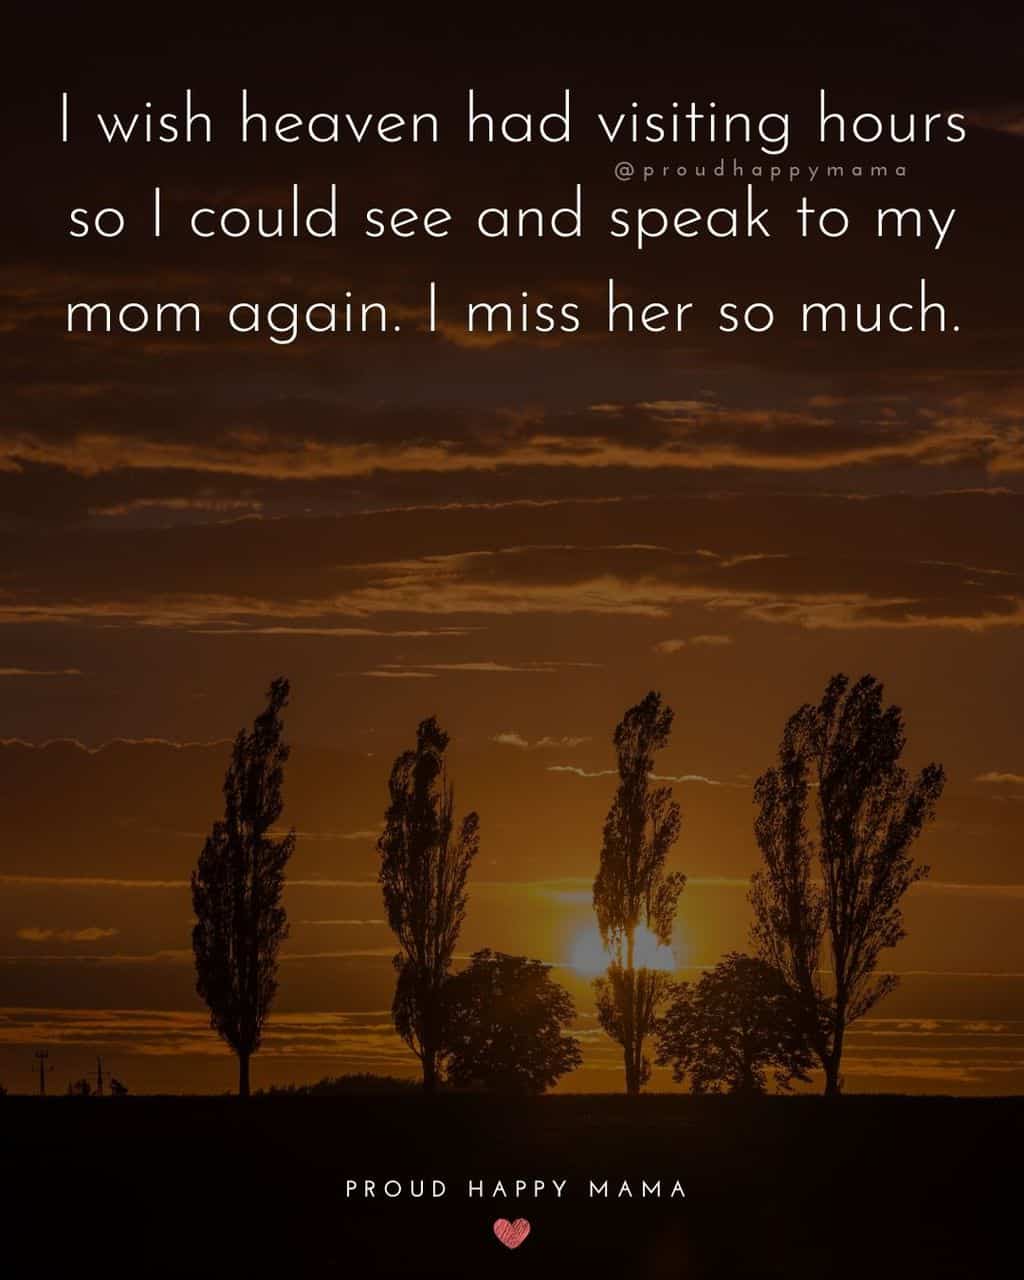 Sunsetting over trees with quote on death of a mother text overlay. ‘I wish heaven had visiting hours so I could see and speak to my mom again. I miss her so much.’